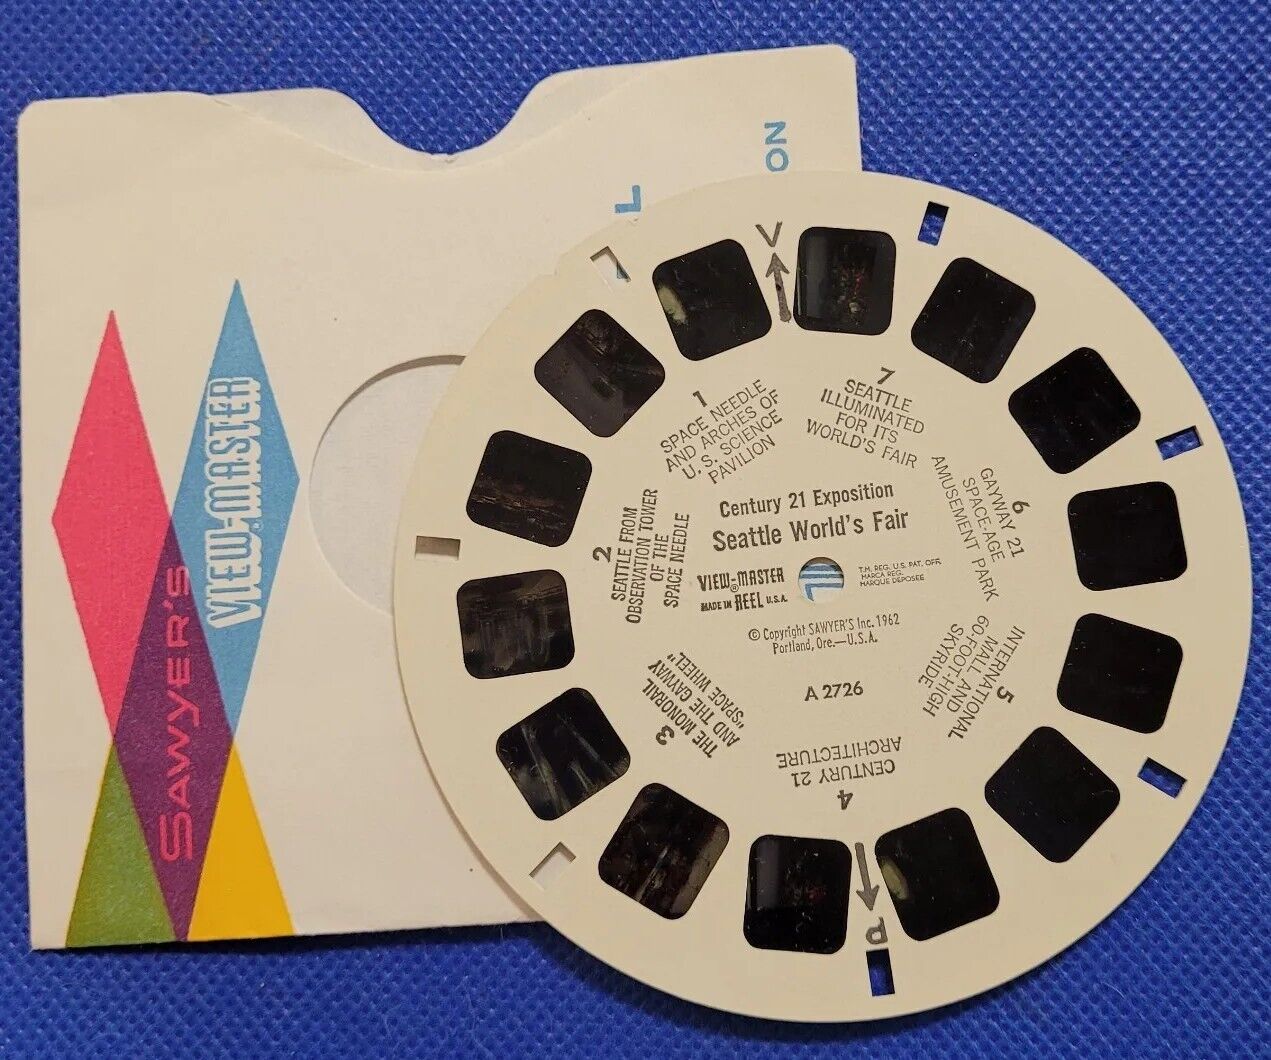 Sawyer's A2726 Seattle World’s Fair Century 21 Exposition view-master reel 1962